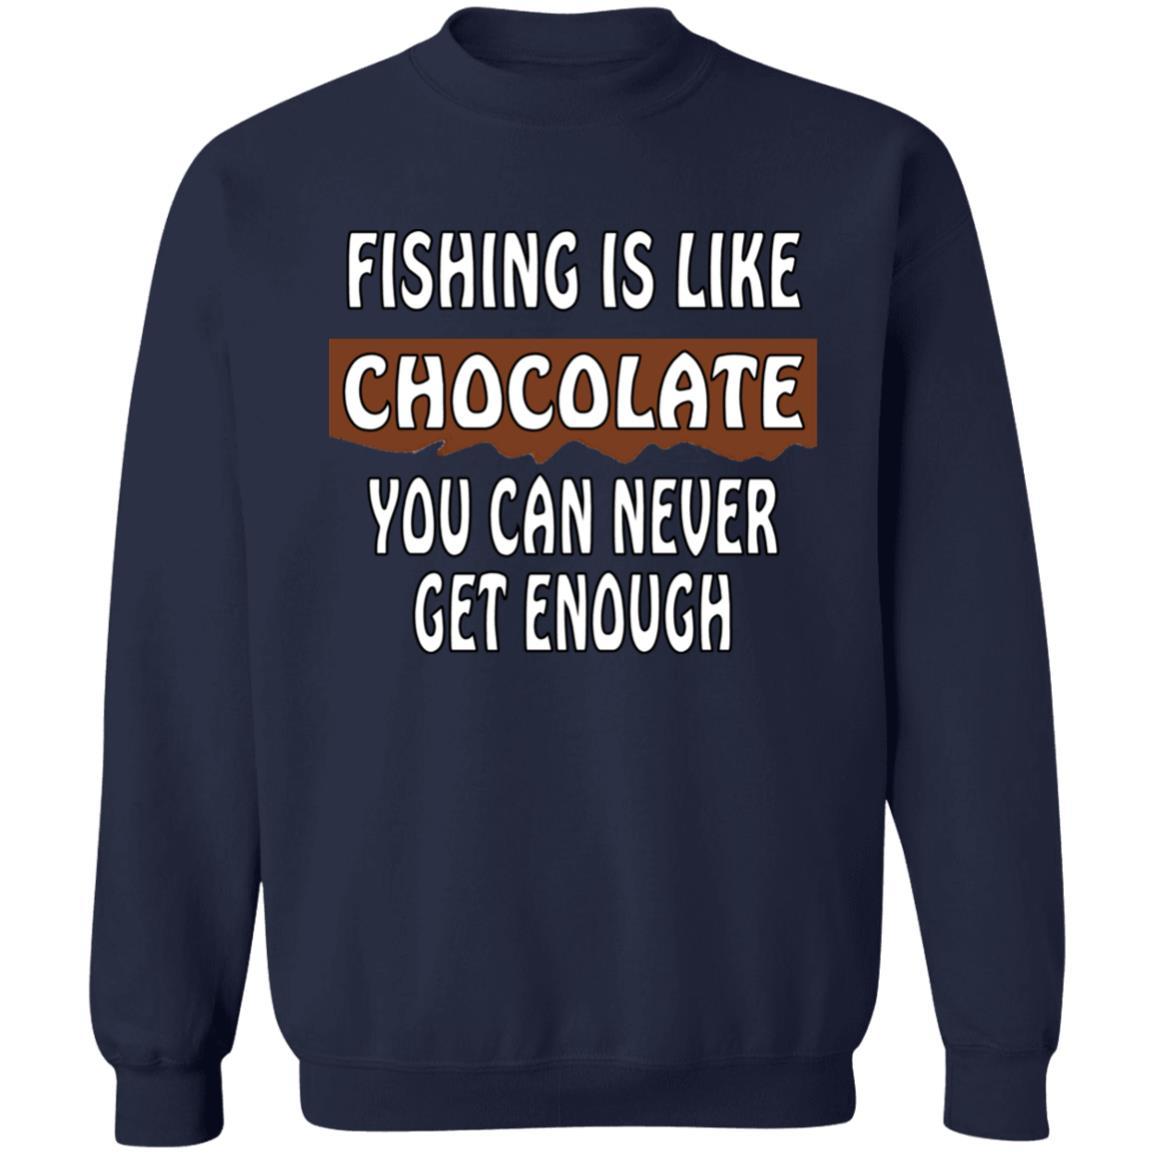 Fishing is like chocolate you can never get enough sweatshirt navy